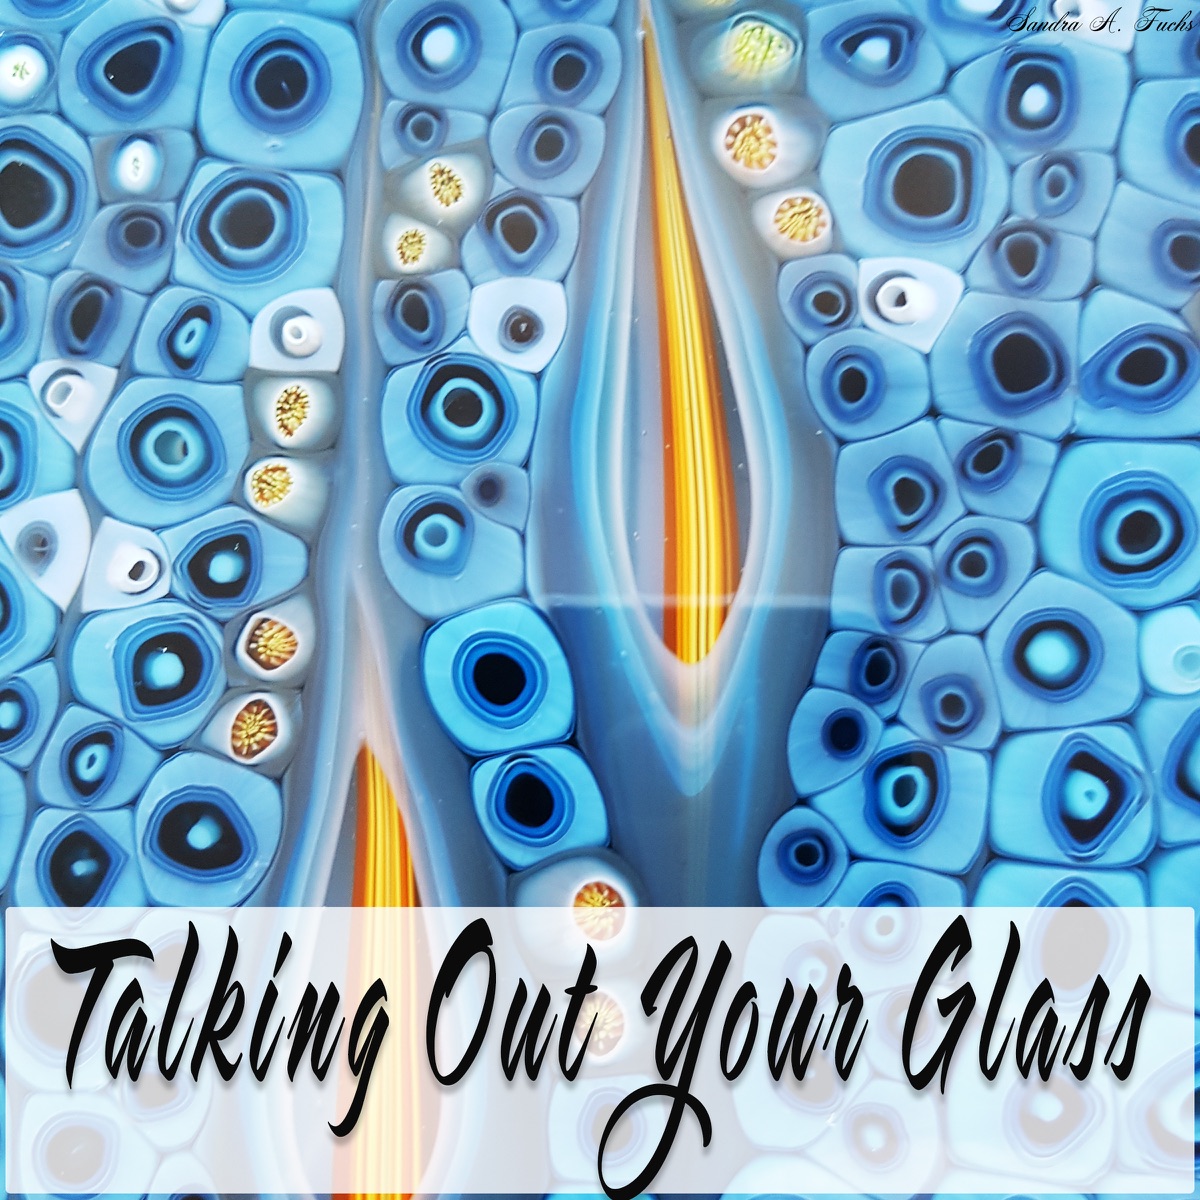 Judson Studios: Innovating in Stained and Fused Glass – Talking